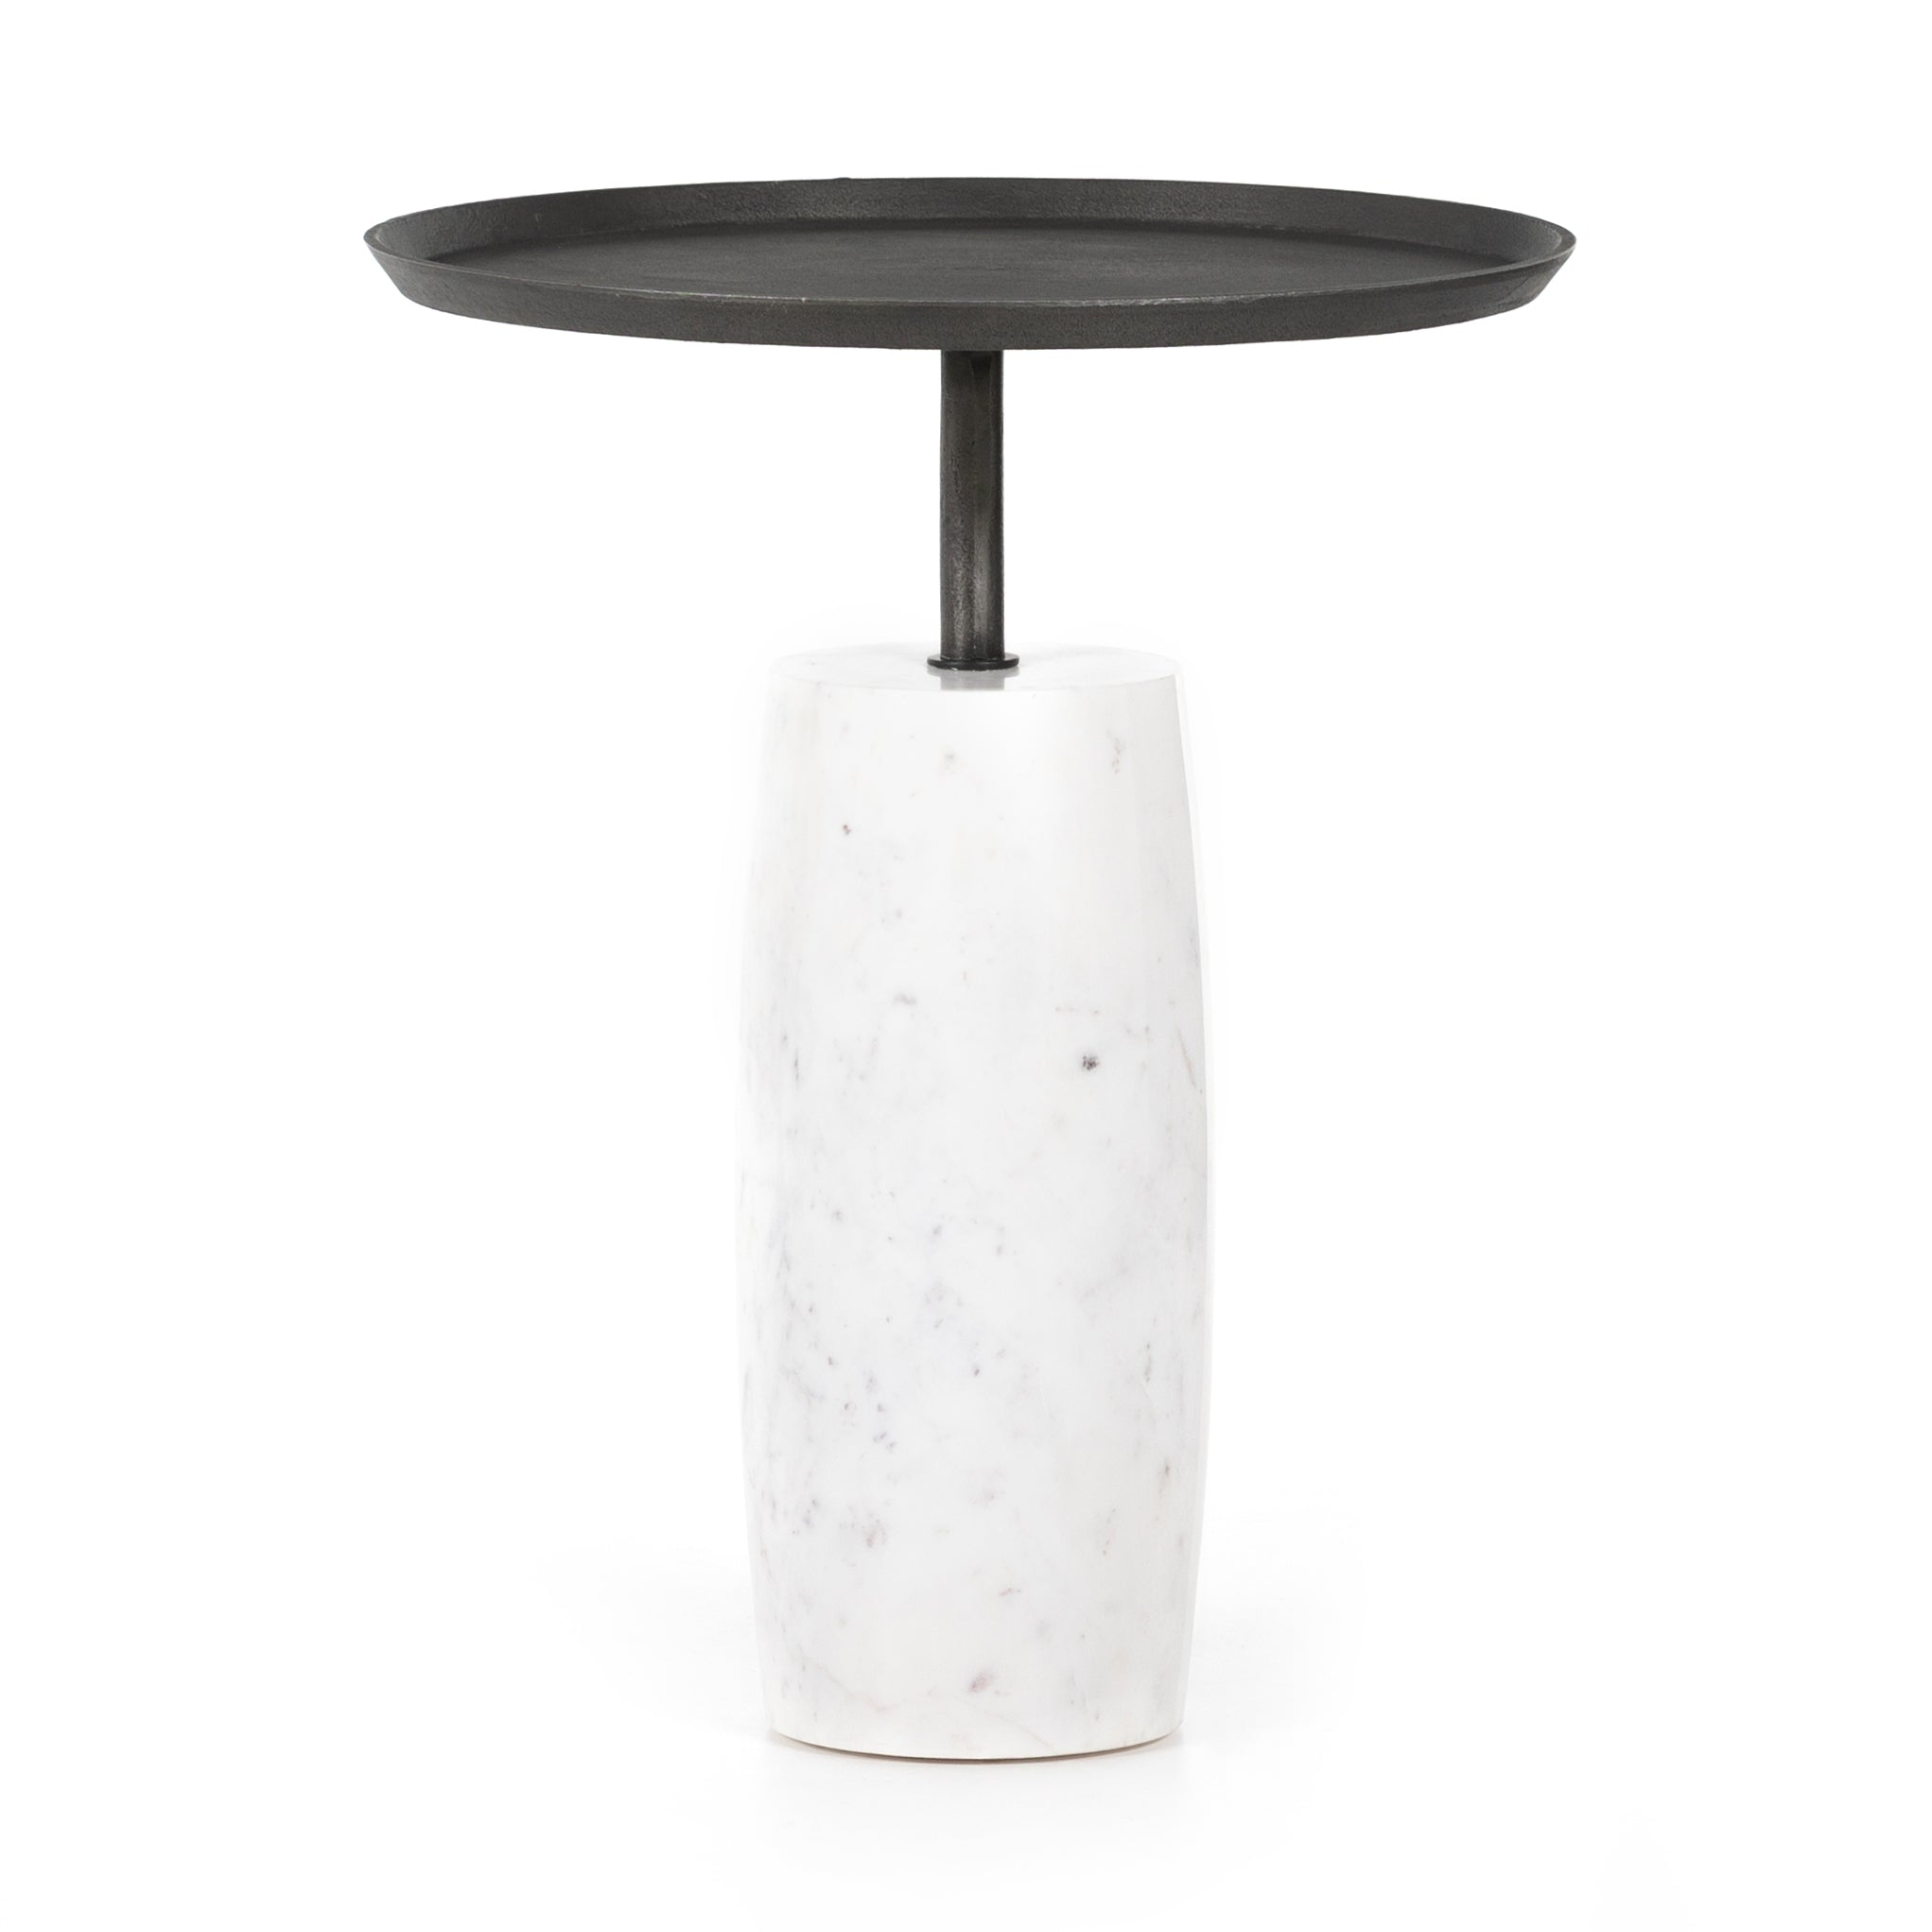 Simply sophisticated with this Cronos End Table - Polished White Marble. Finished in a polished white, a solid turned marble base supports a tray-style tabletop of grey-hammered iron, spurring beautifully eye-catching contrast for any living room or bedroom.   Overall Dimensions: 19.75"w x 19.75"d x 24.75"h